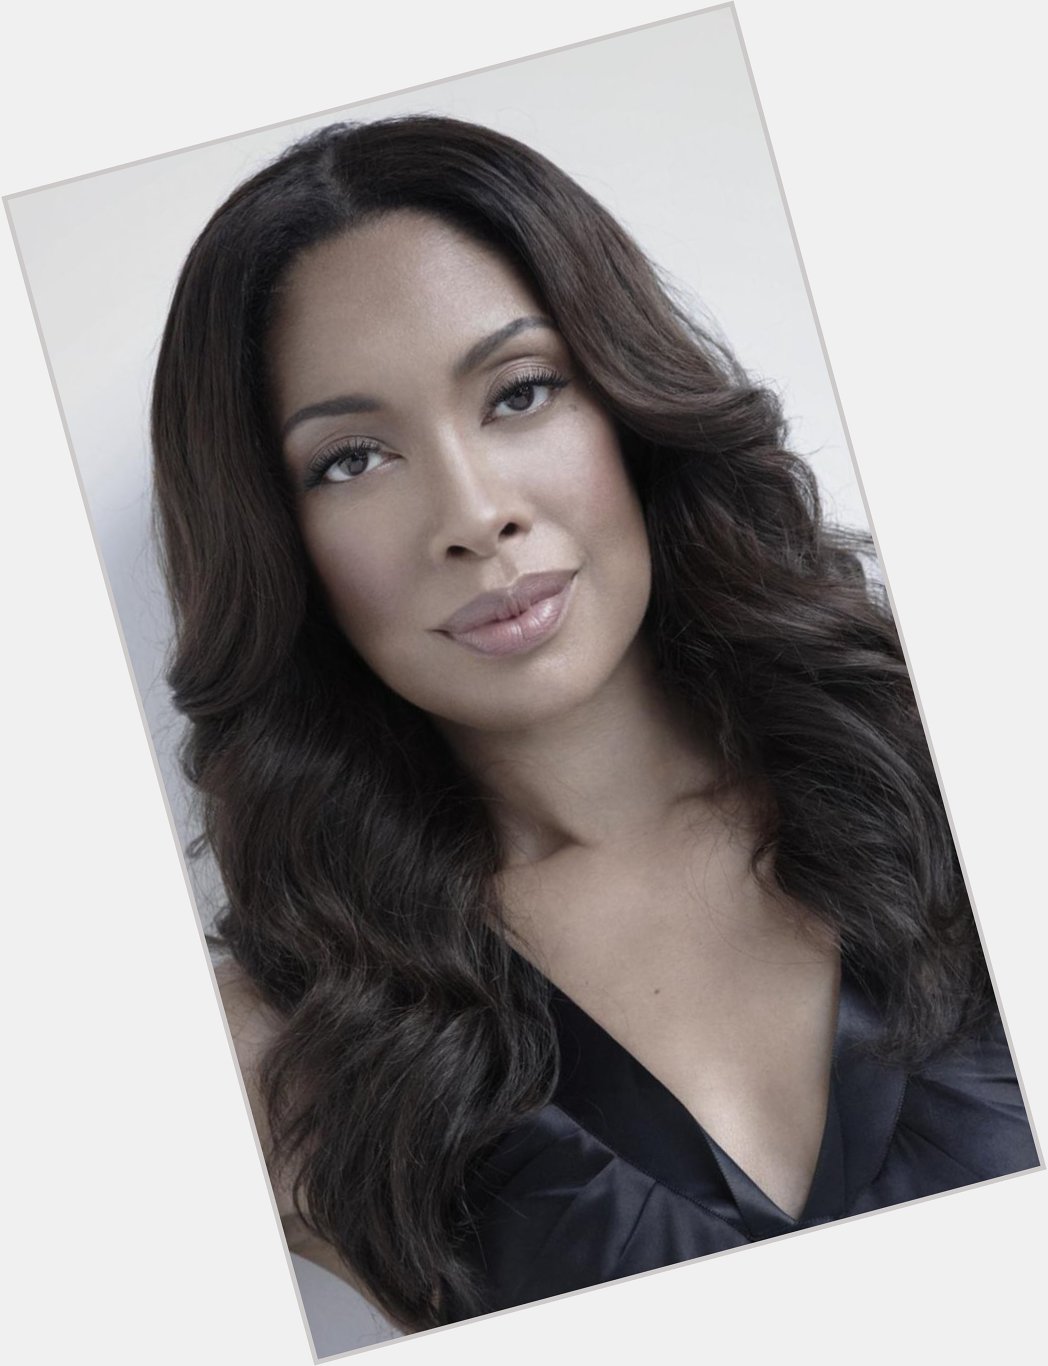 Happy Birthday to Gina Torres who turns 51 today! 